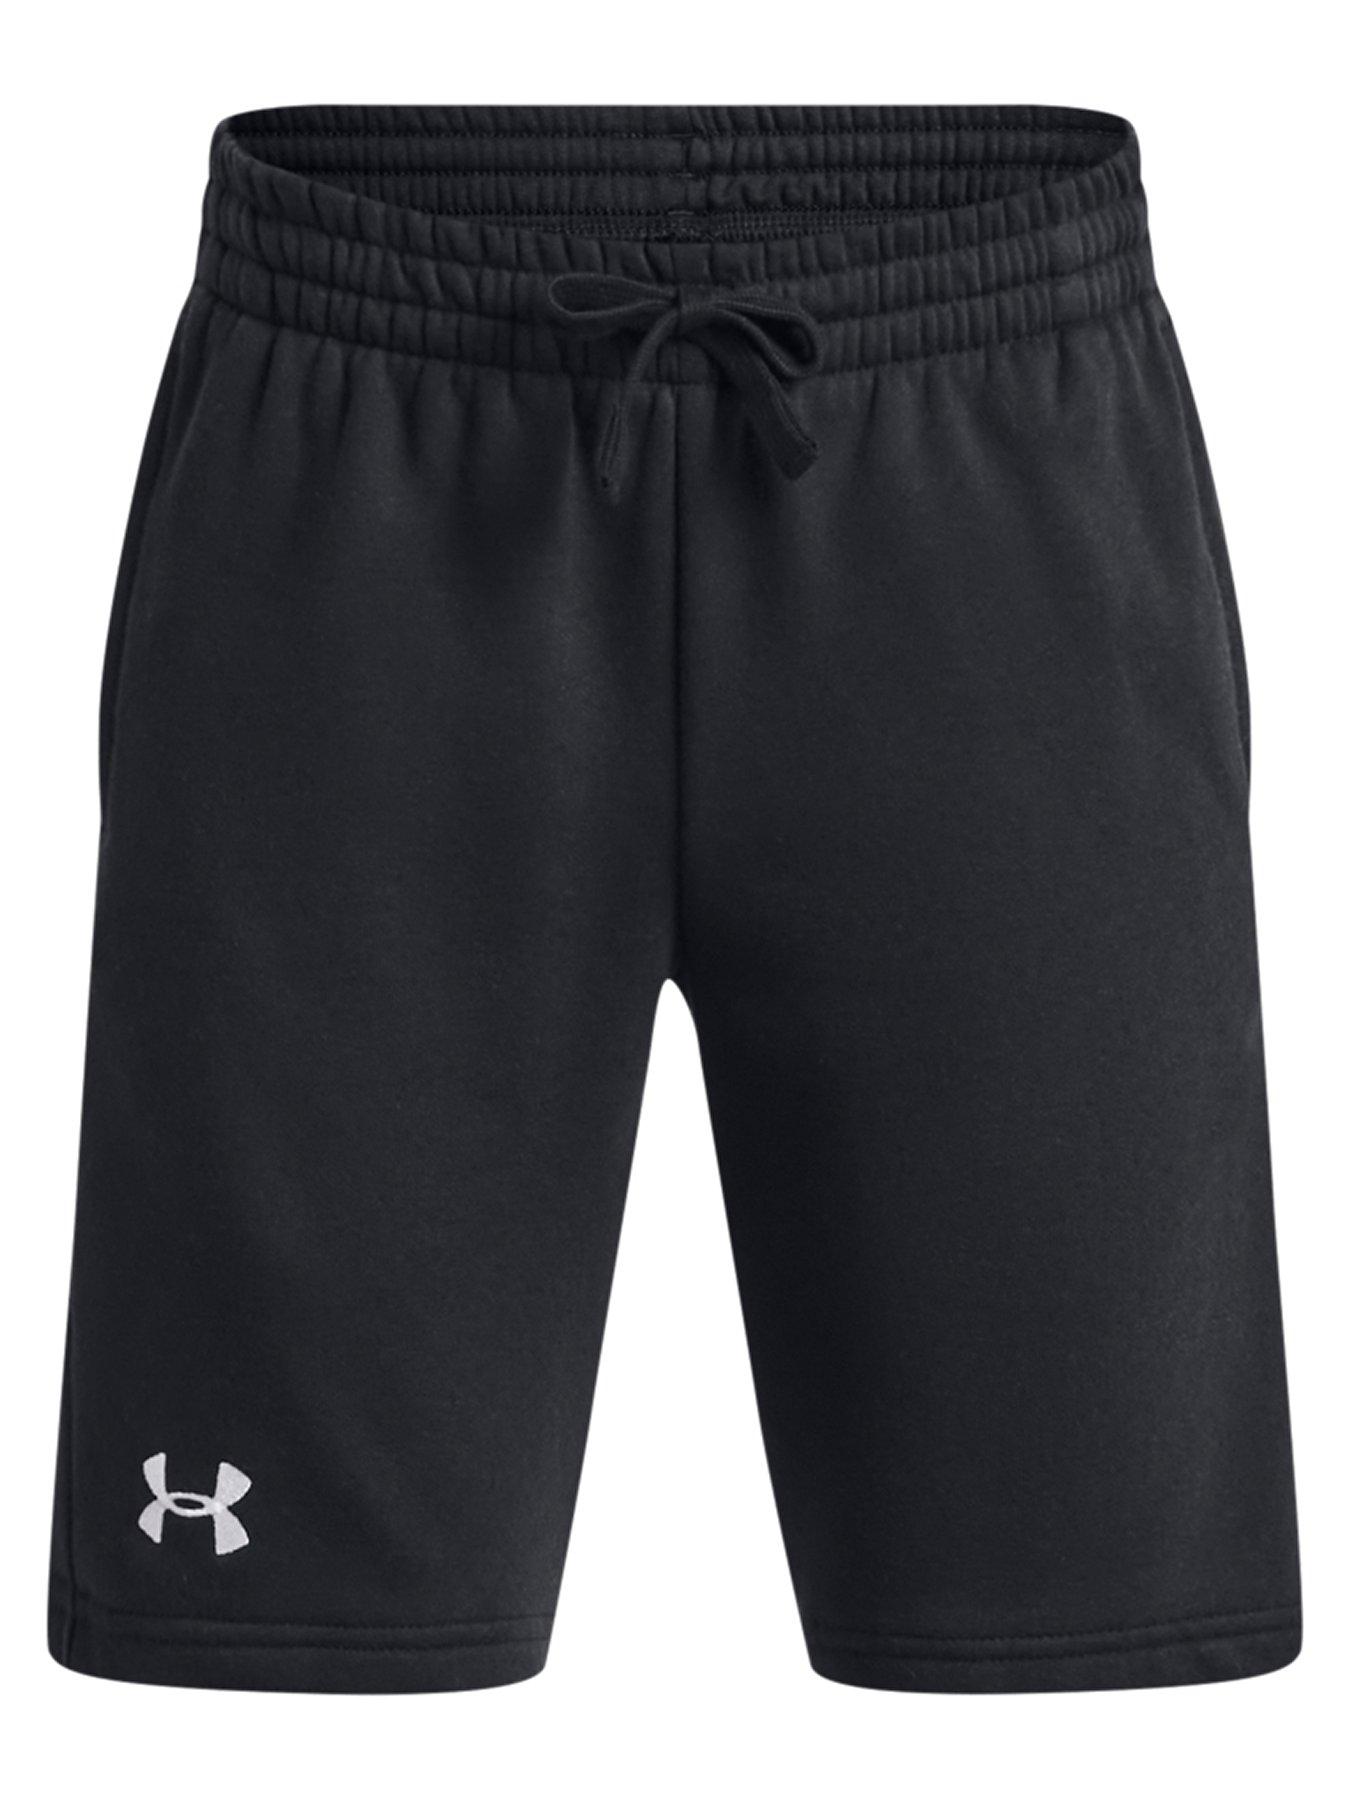 Men's UA Elevated Woven Graphic Shorts